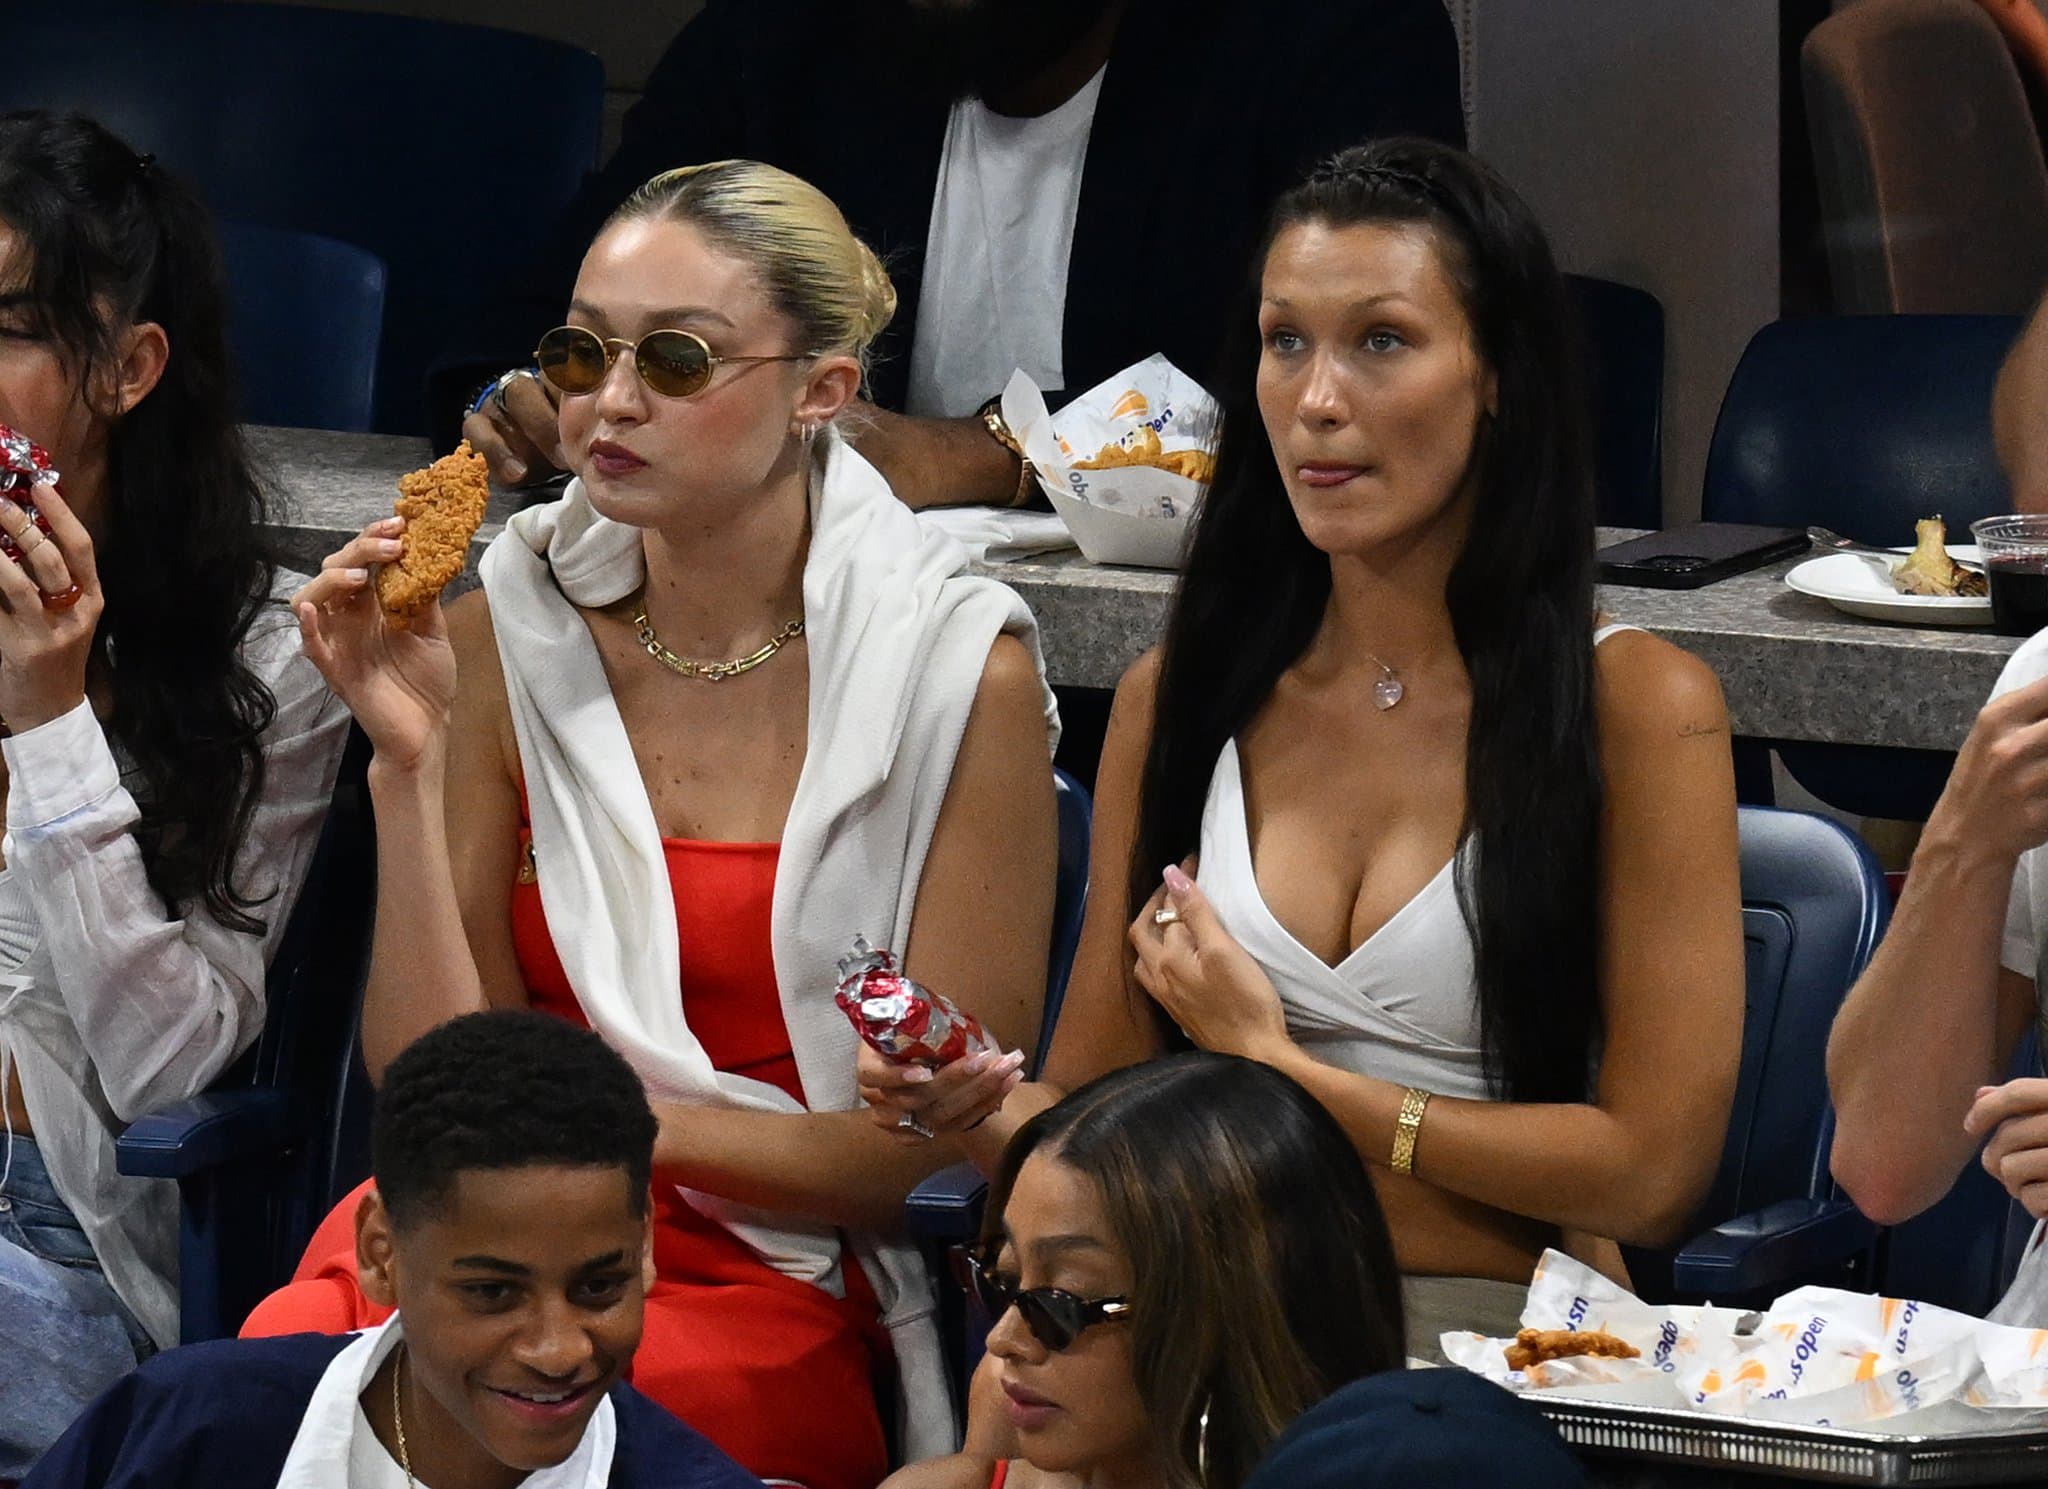 Sisters Gigi and Bella Hadid attend day 8 of the 2022 US Open